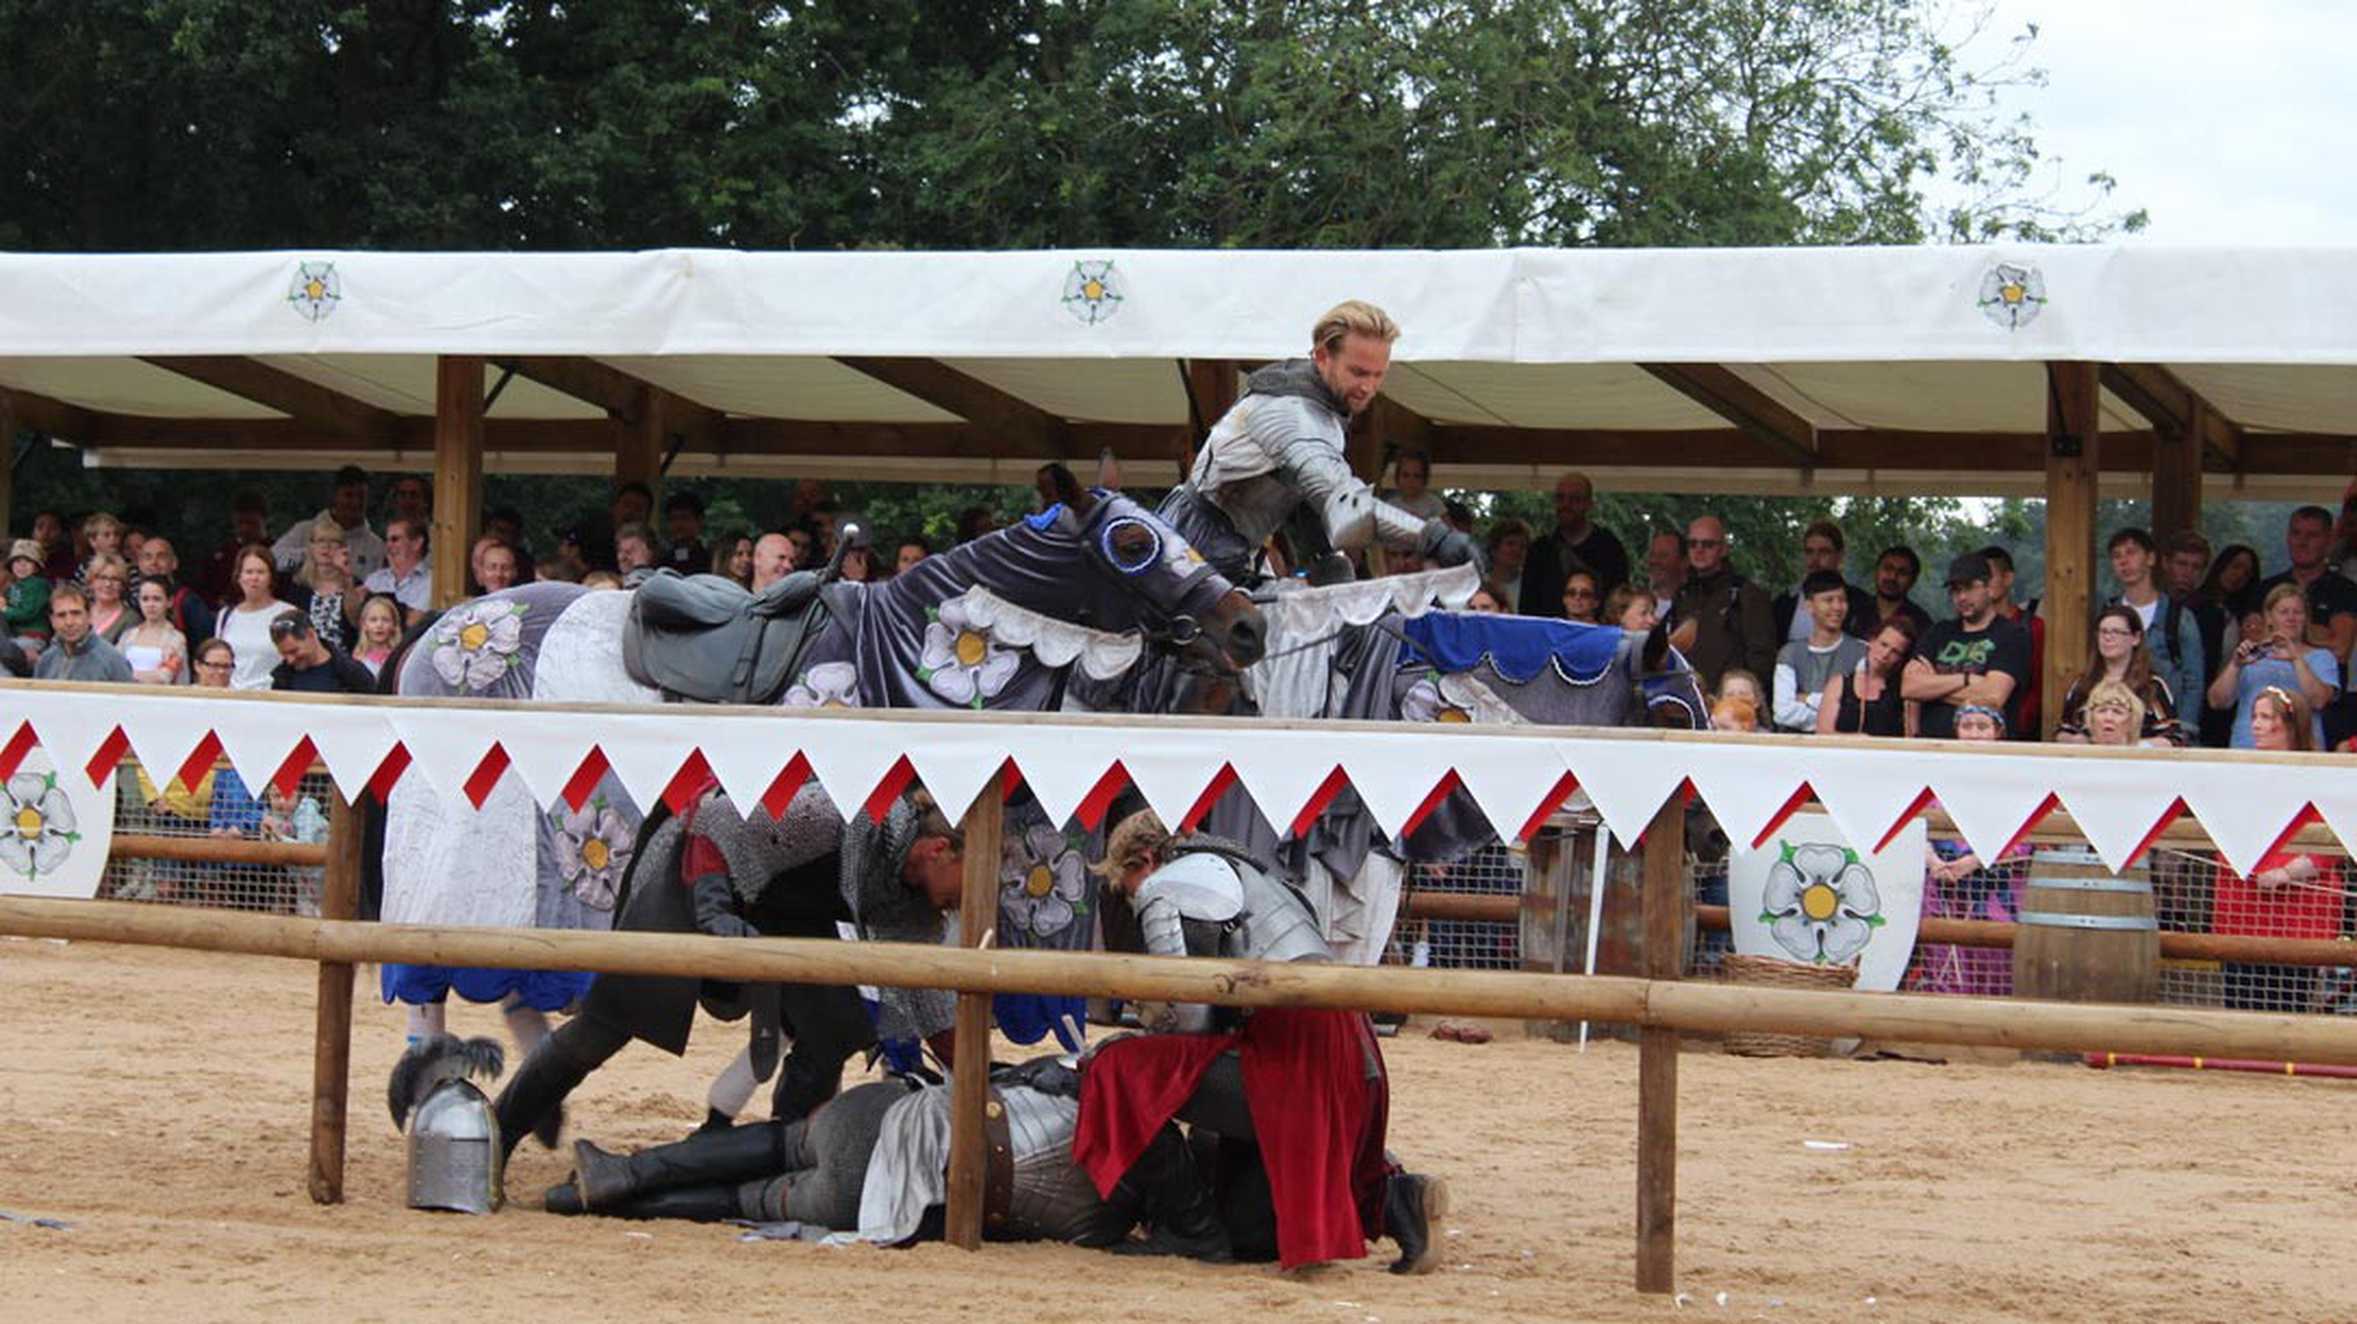 Crowds watch on as a knight recovers after being knocked of his horse during a joust.